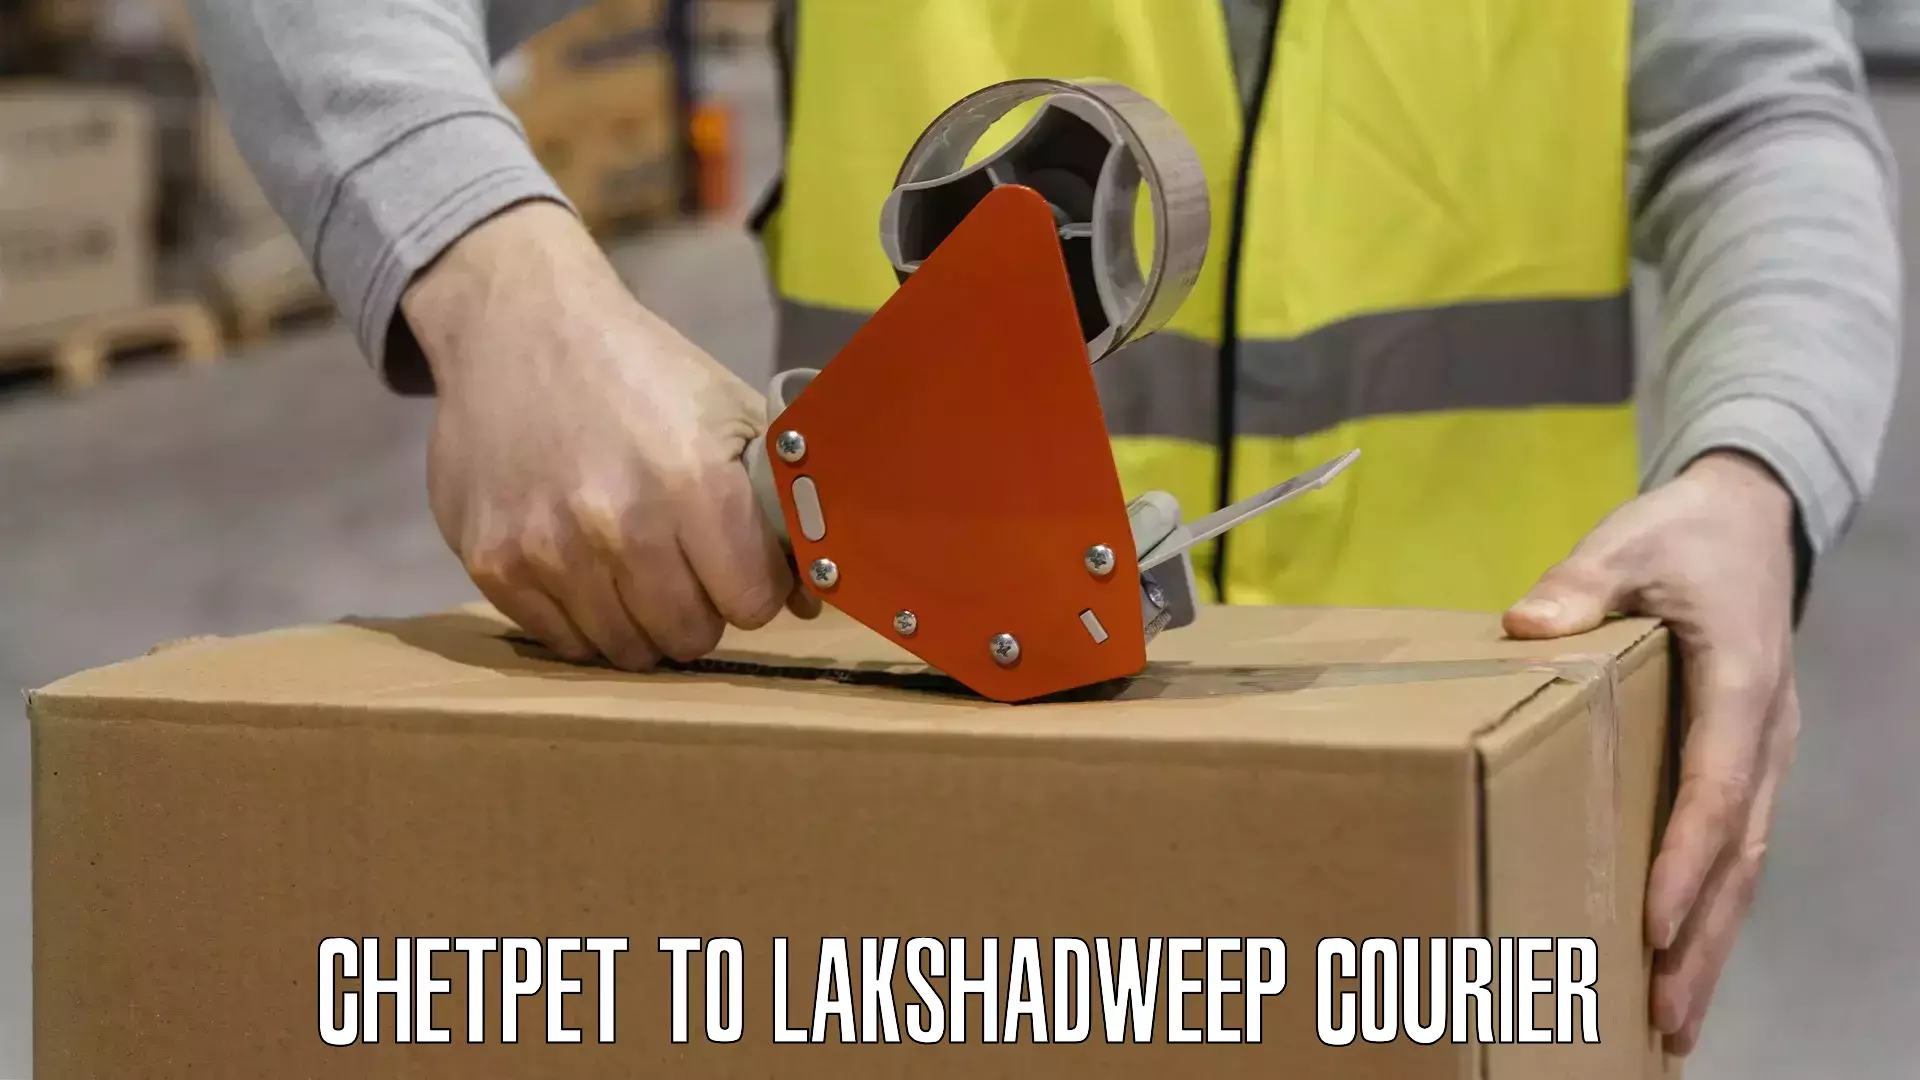 Smart courier technologies Chetpet to Lakshadweep